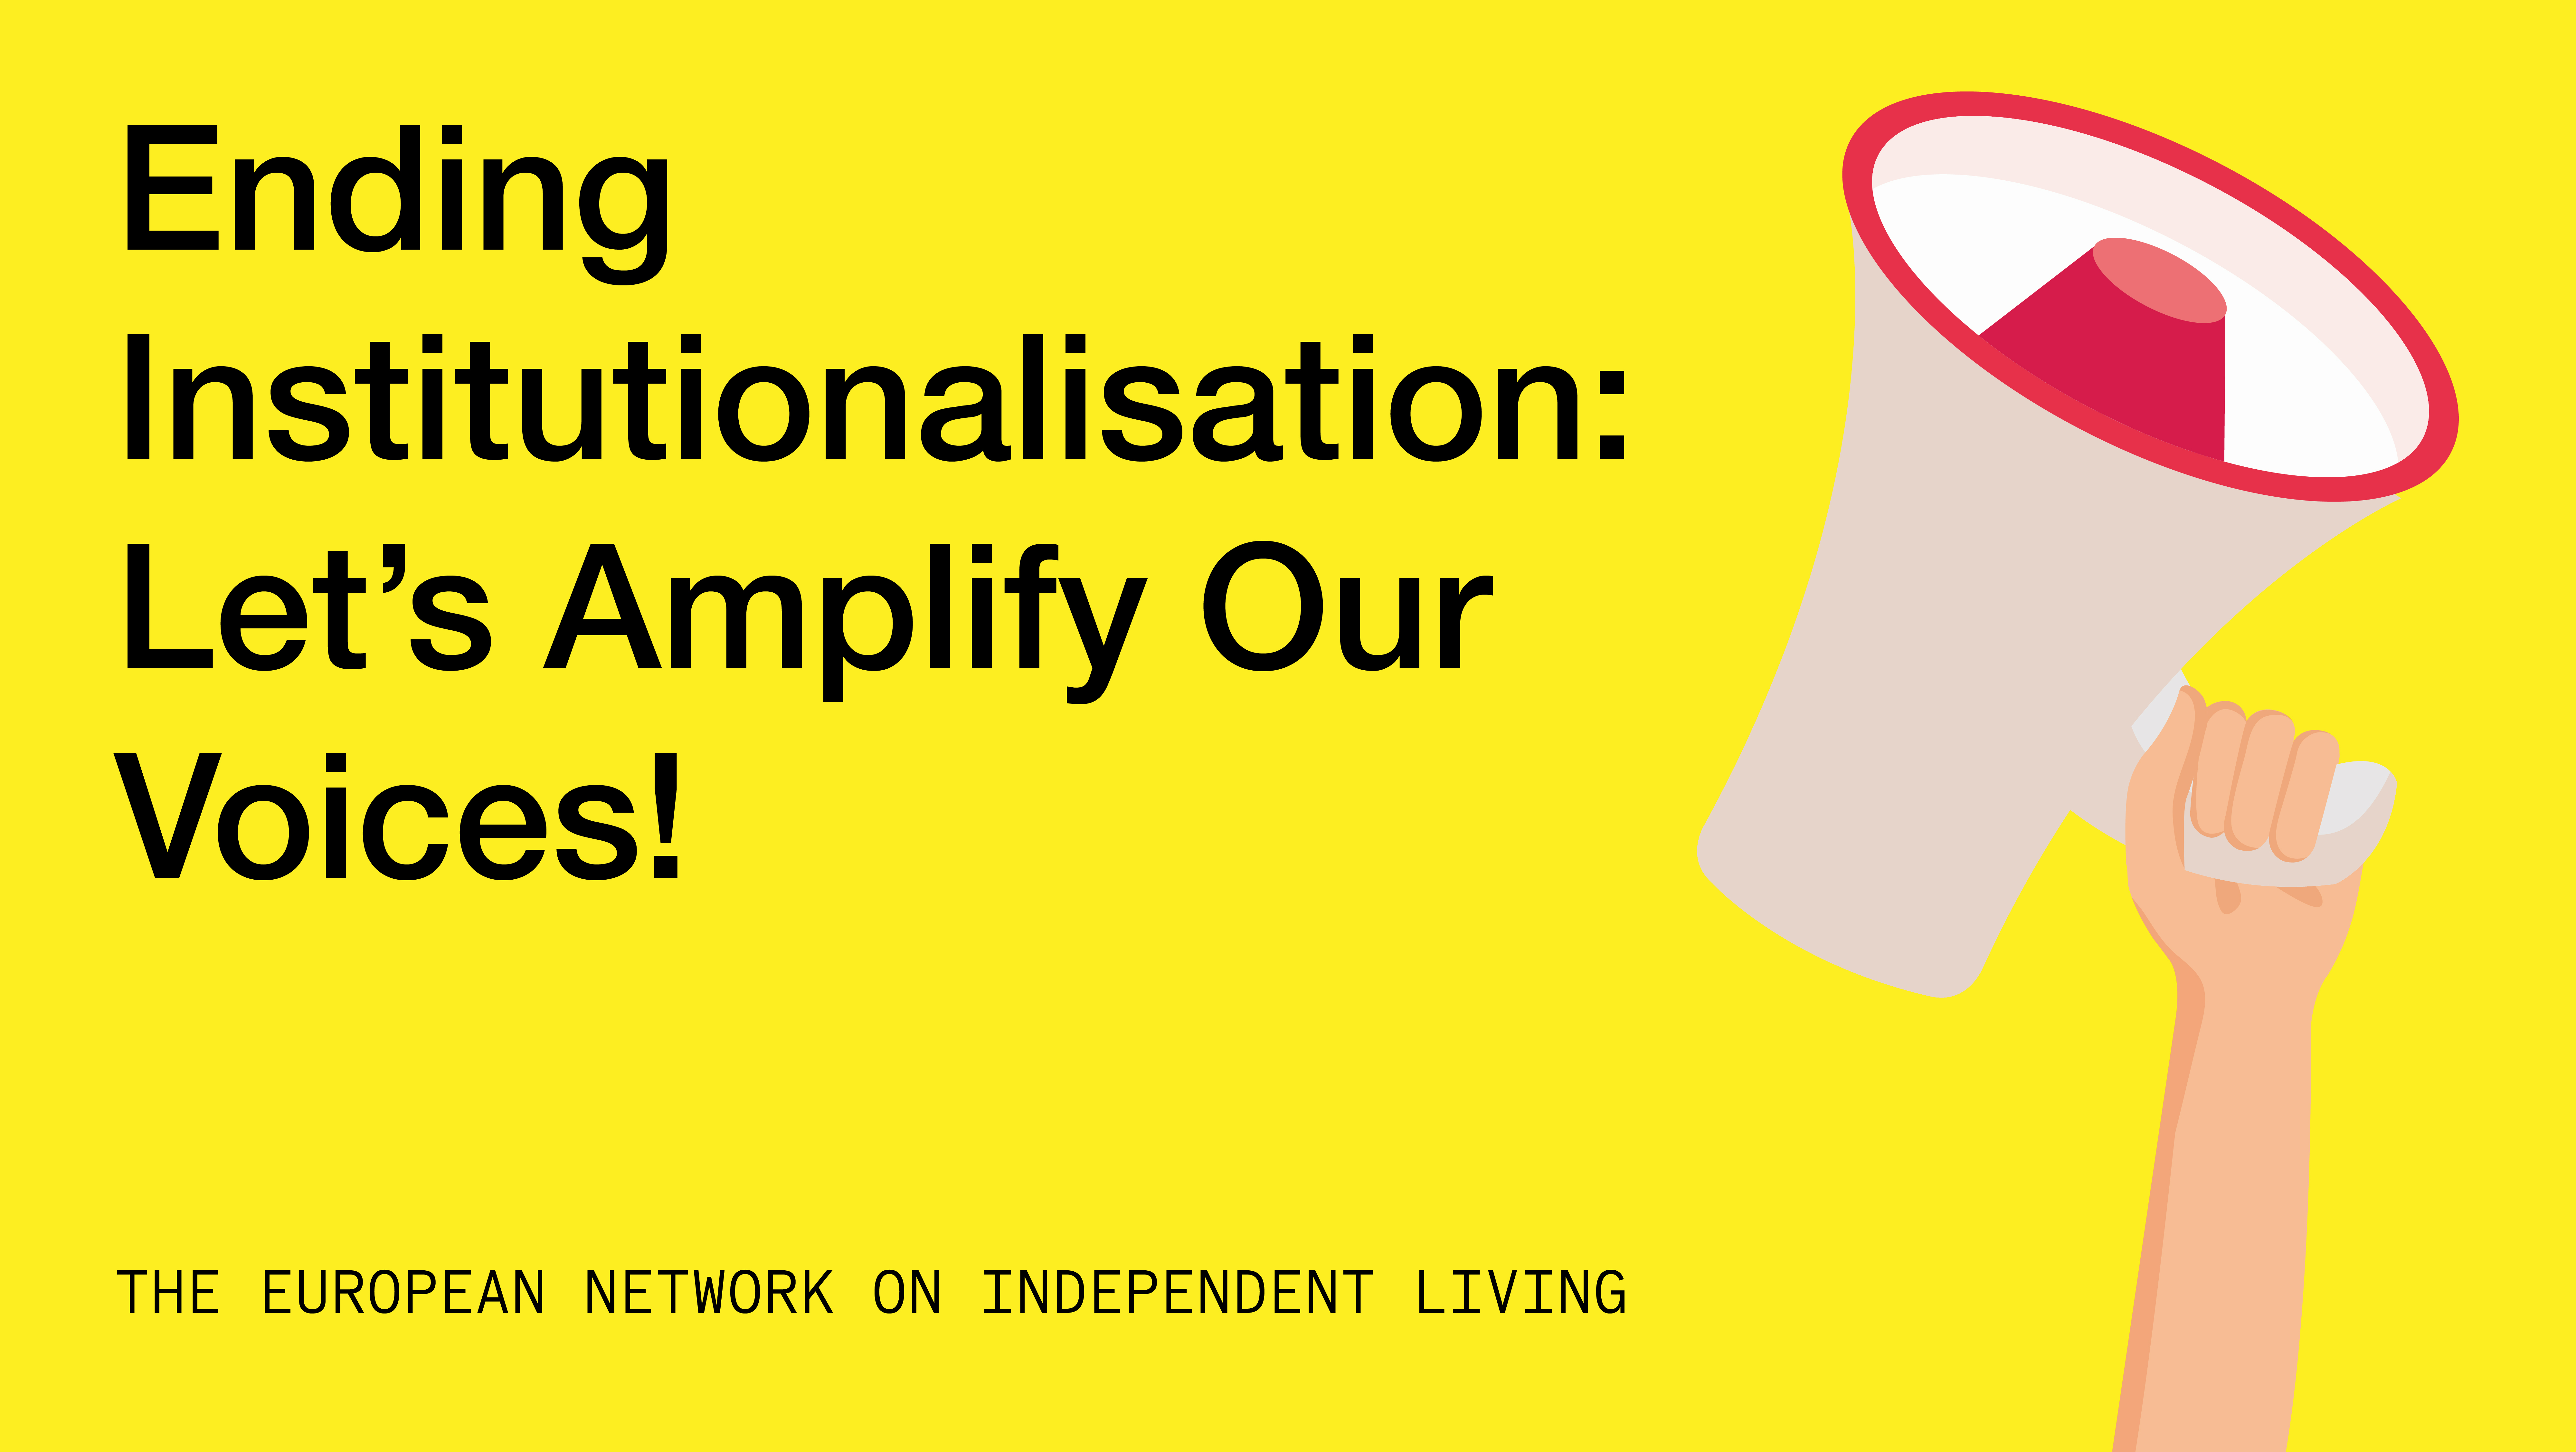 End Institutionalisation: Let’s Amplify Our Voices!